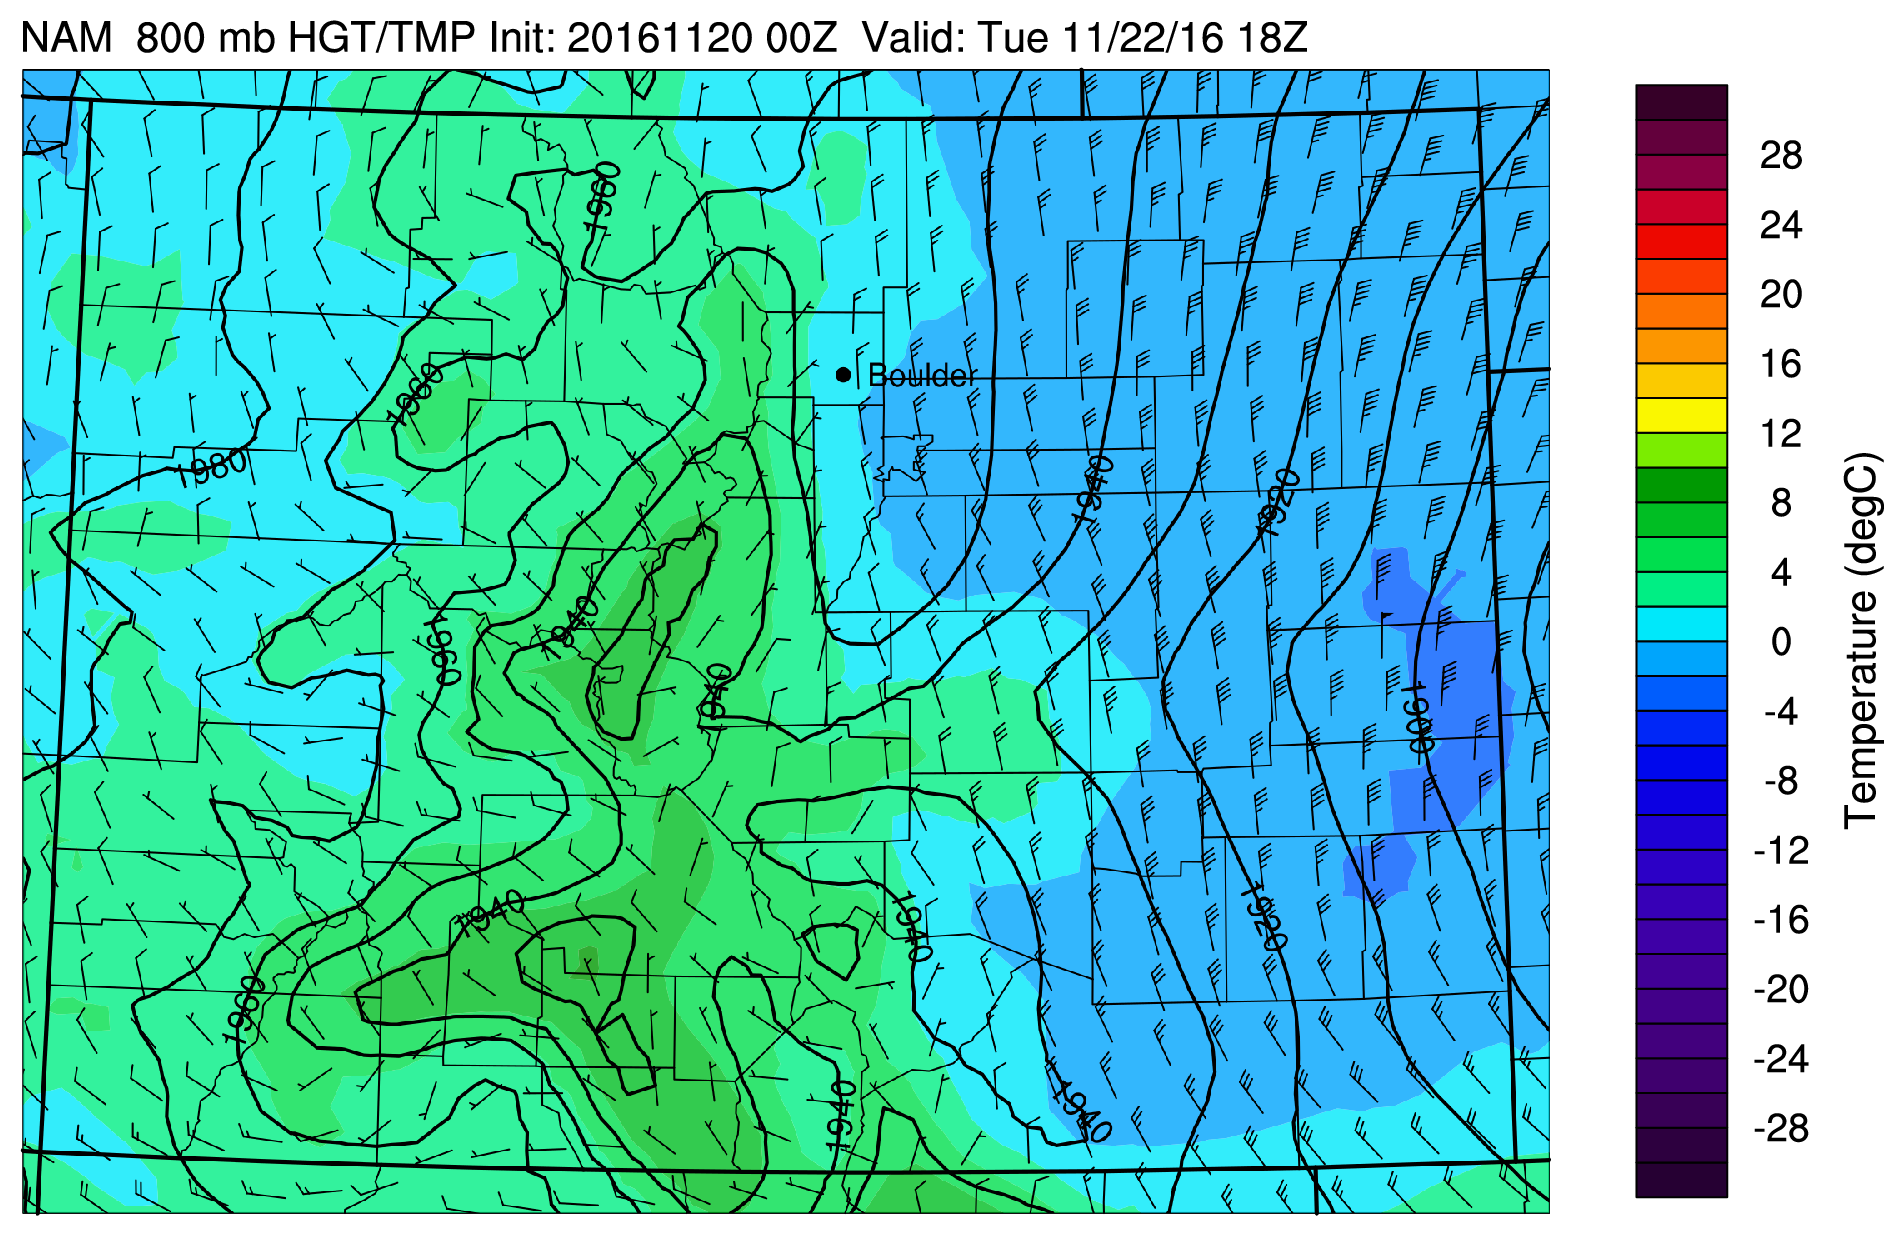 NAM 800 mb temperature and wind for Tuesday